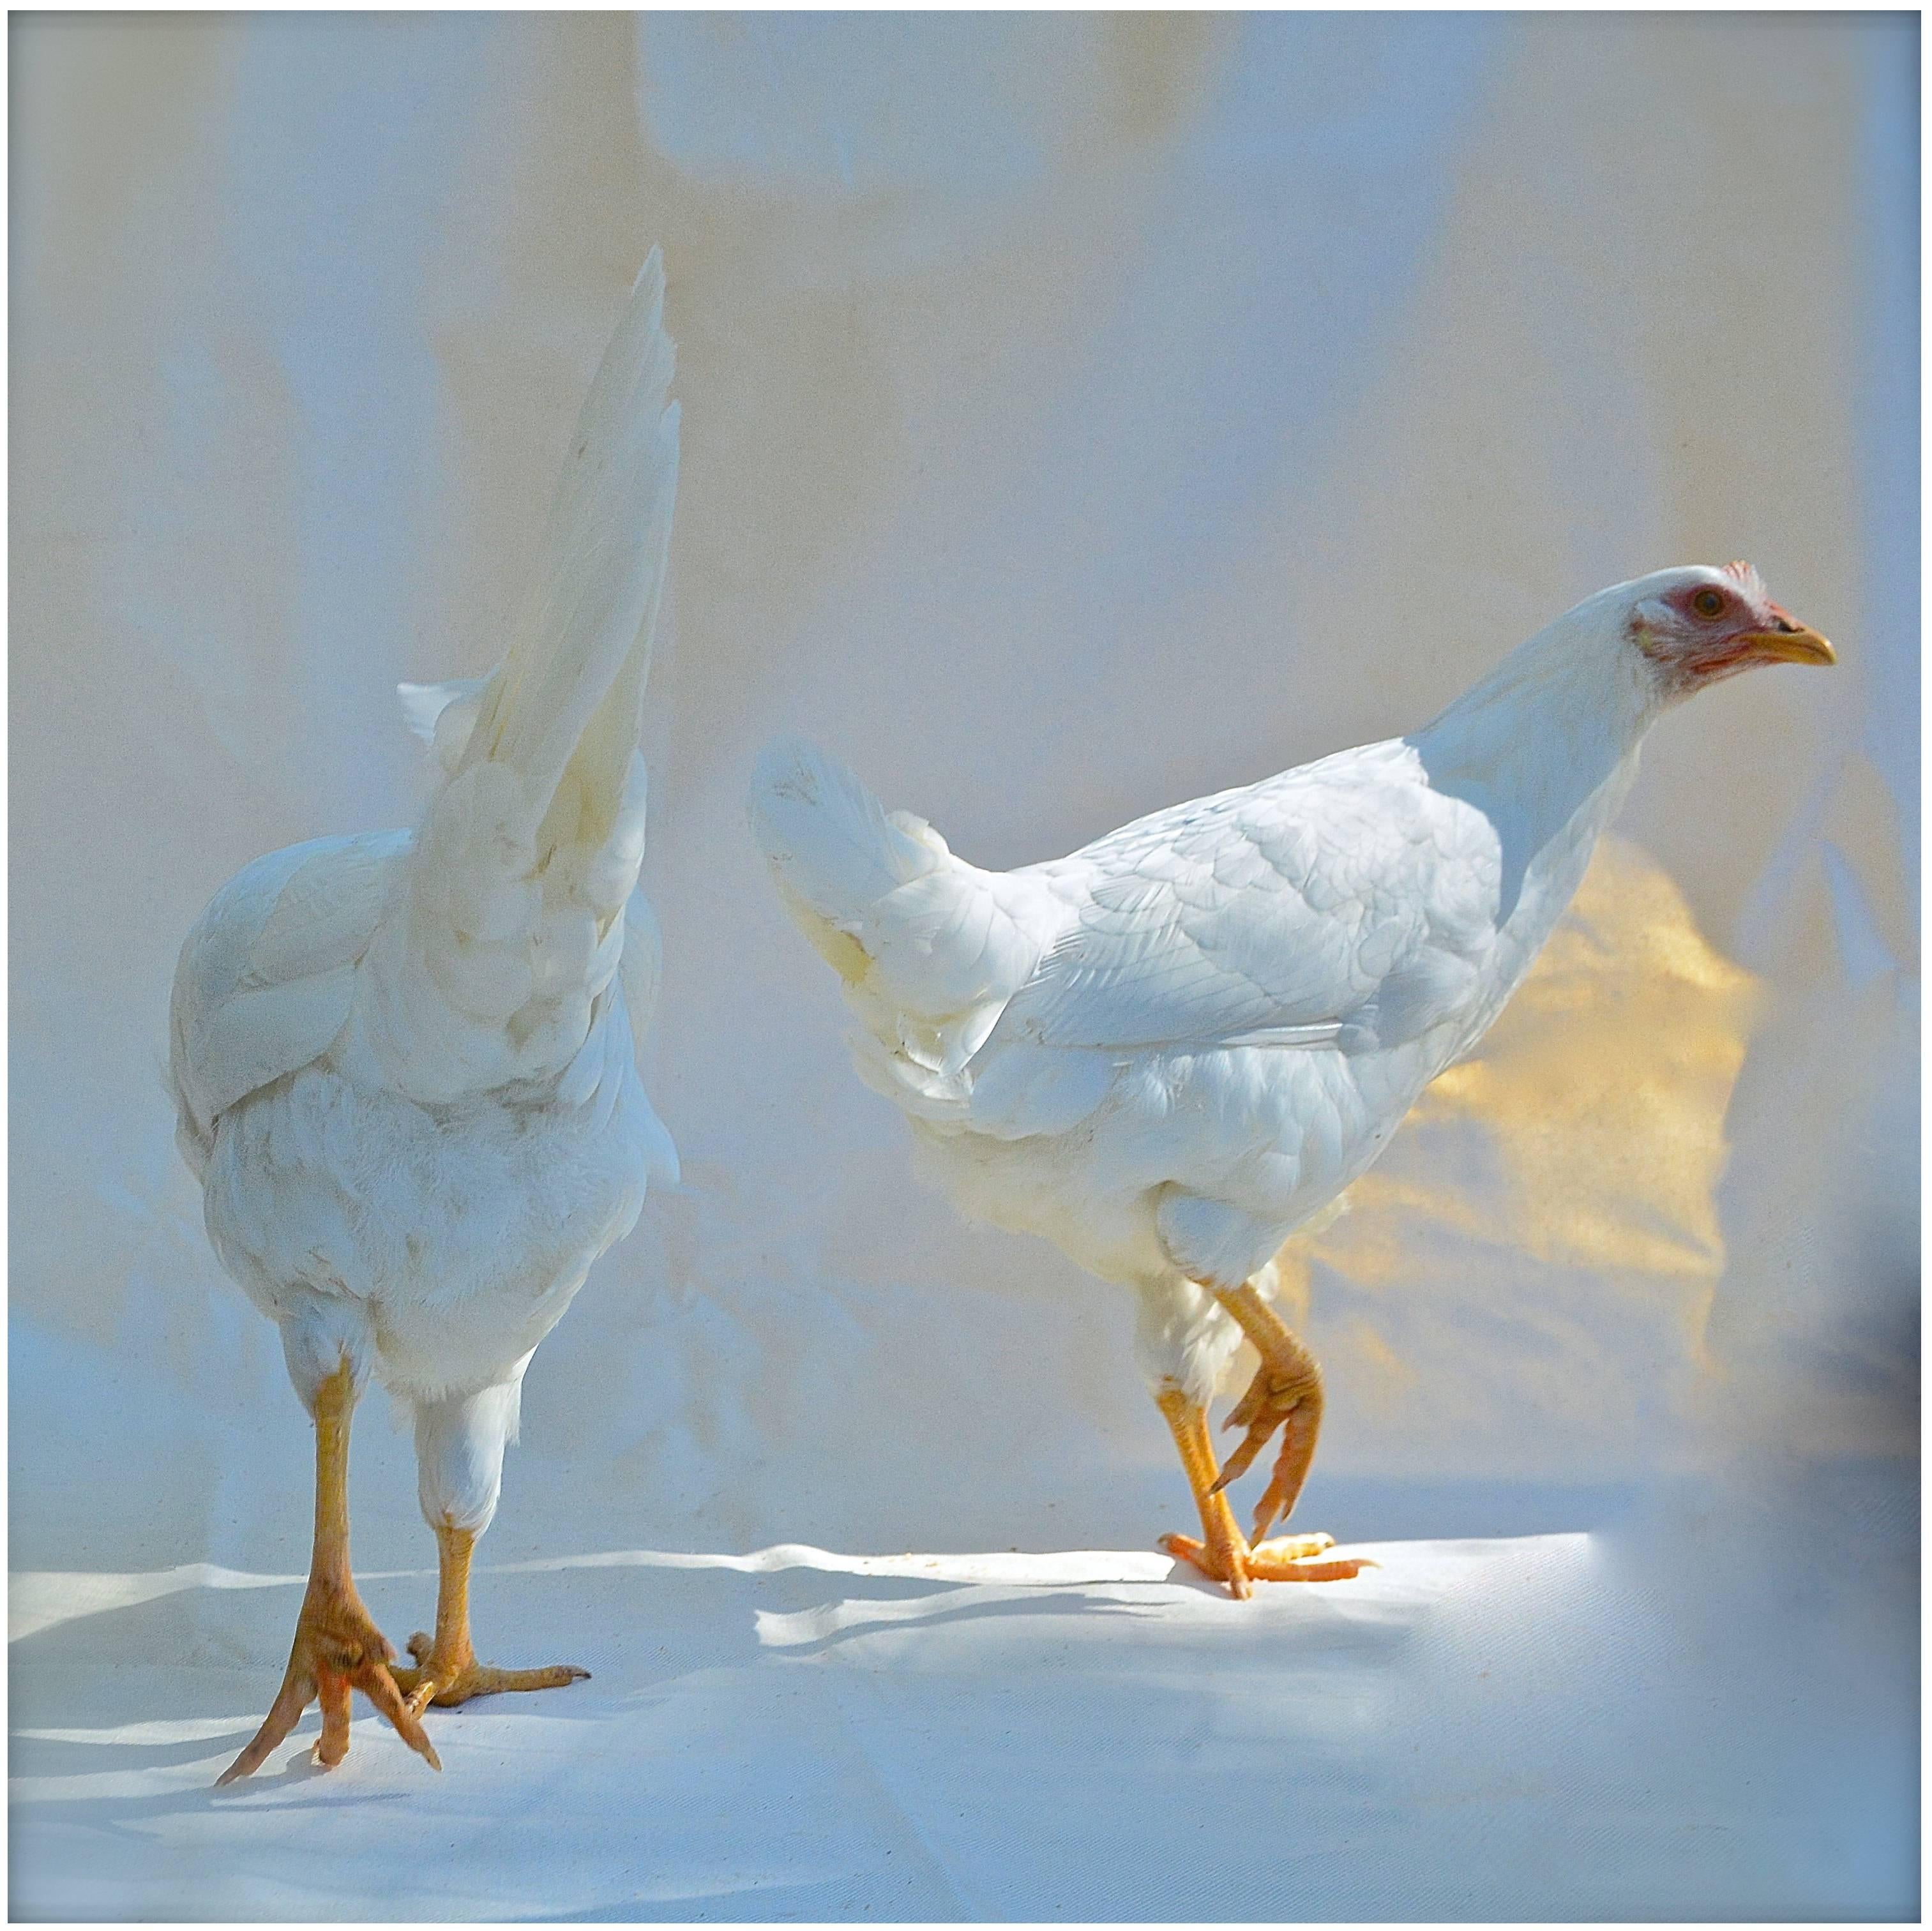 'Isabella Rossellini's  Heritage Chickens "Photographed by Patrice Casanova NY